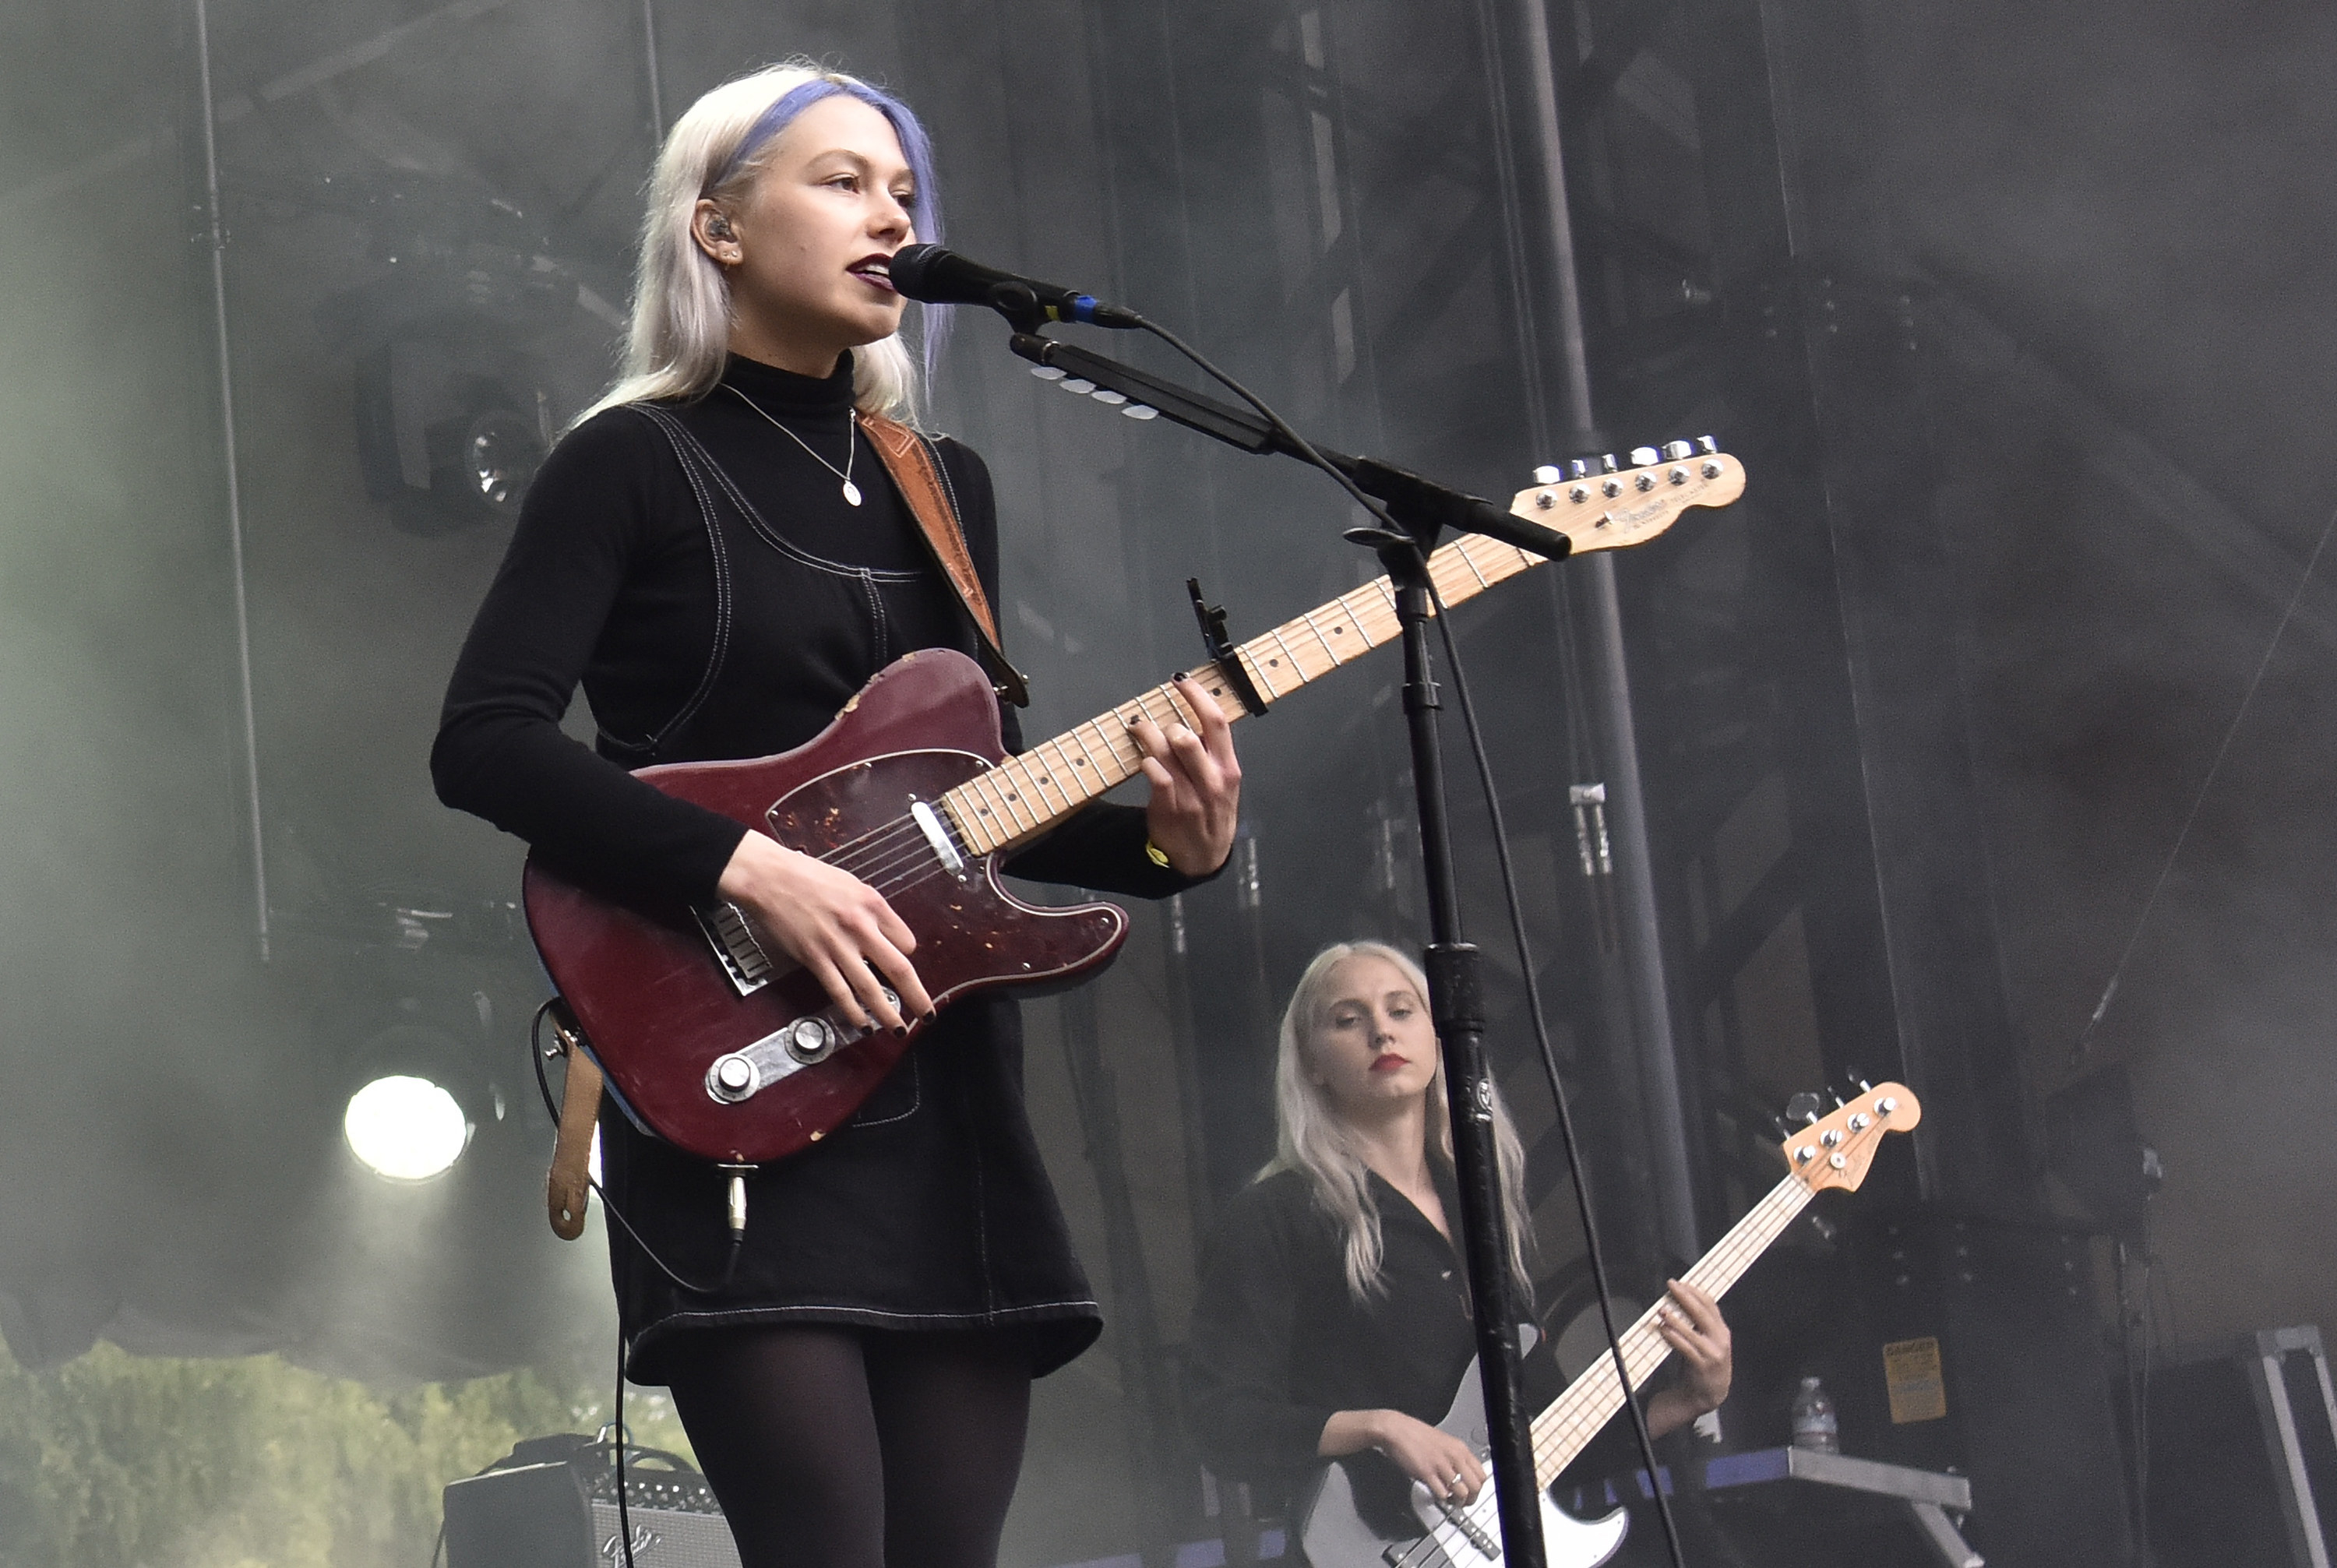 Phoebe Bridgers plays guitar and sings as part of Better Oblivion Community Center at the 2019 Outside Lands festival